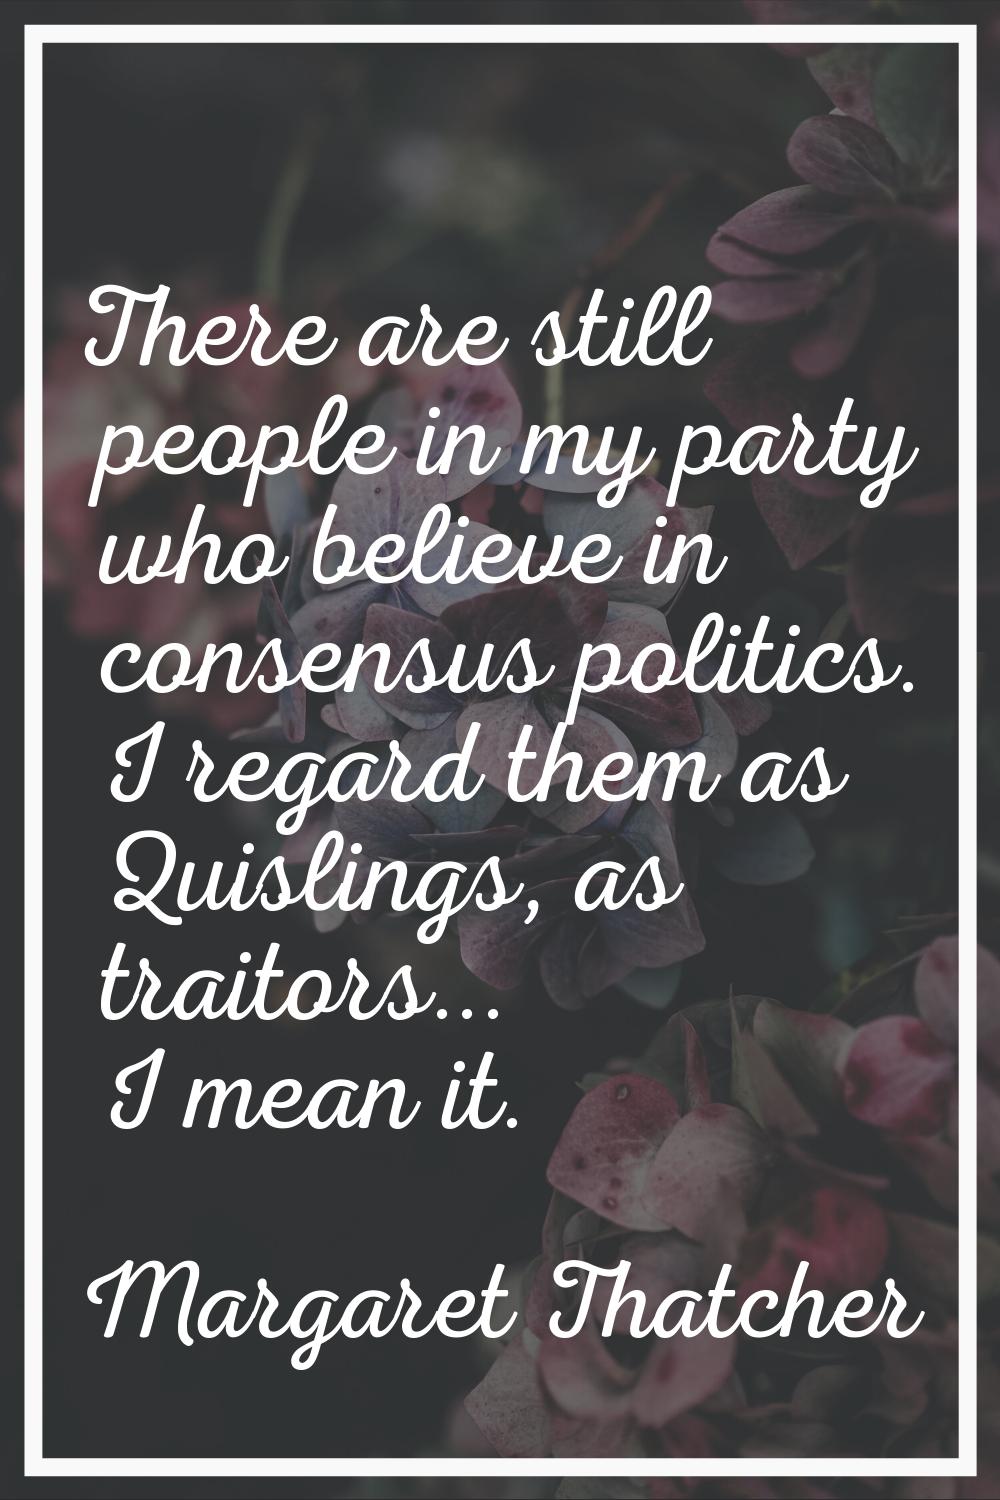 There are still people in my party who believe in consensus politics. I regard them as Quislings, a